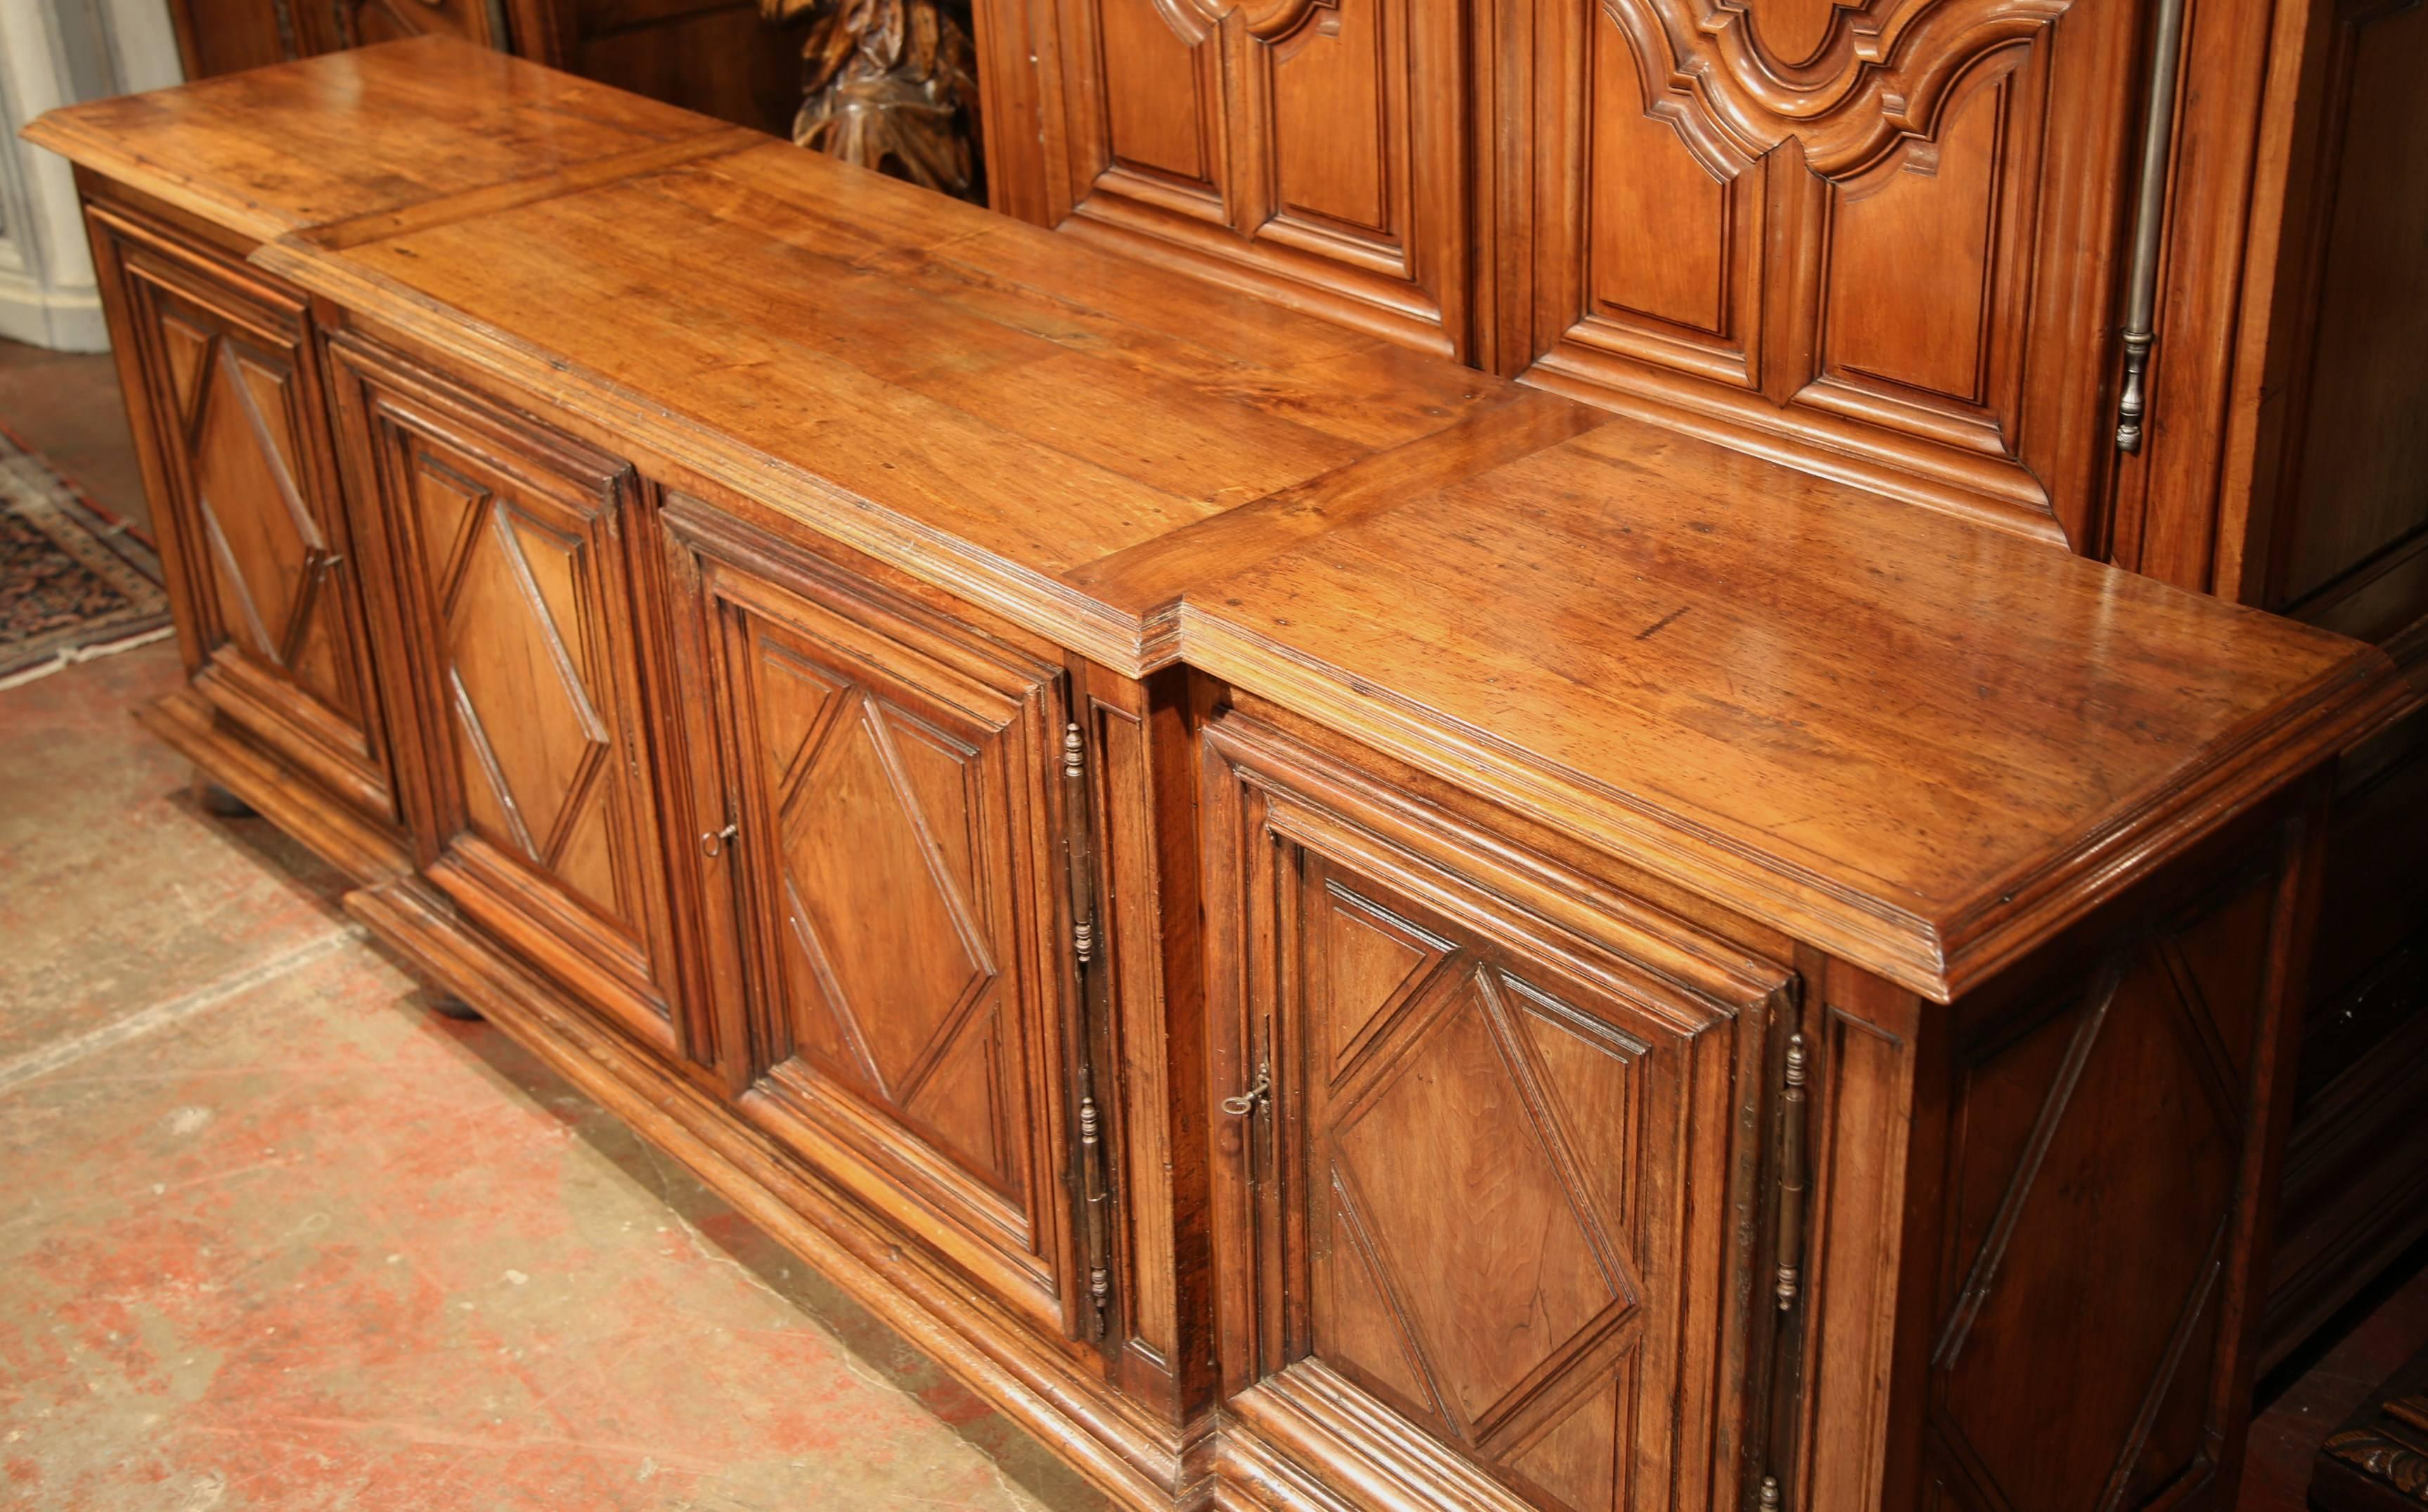 This large, antique fruitwood buffet was carved in the south of France, circa 1820. The long cabinet features four doors with a simple, geometric diamond shape design. The utilitarian piece sits on bun feet and offers ample storage space behind the